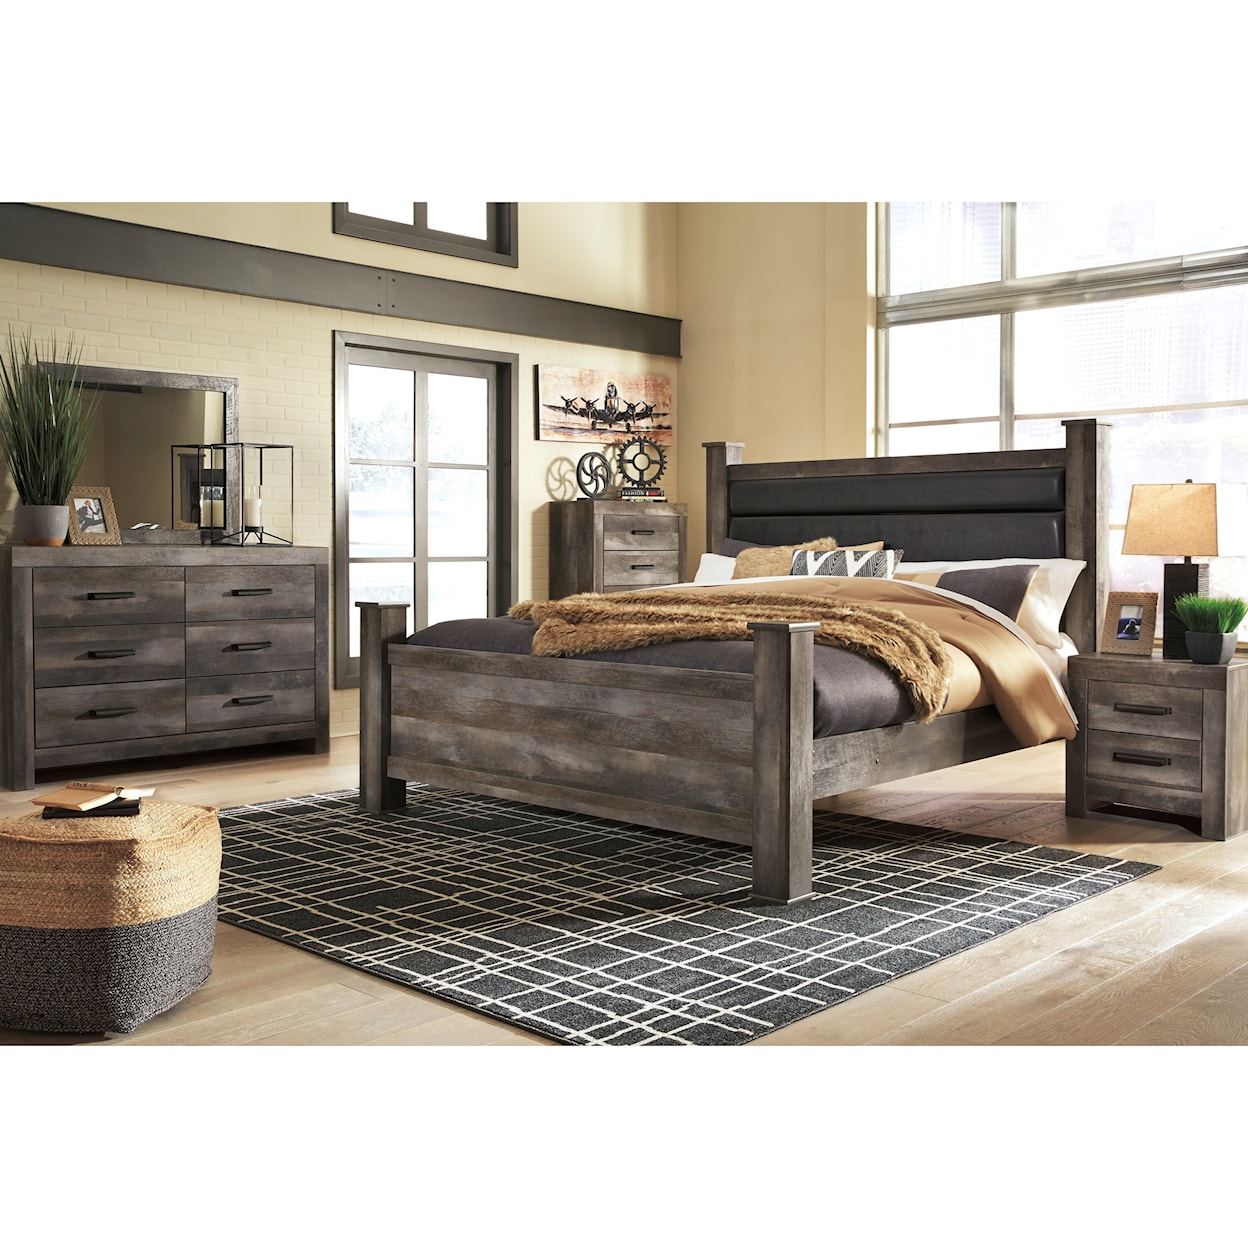 Ashley Furniture Signature Design Wynnlow King Bedroom Group